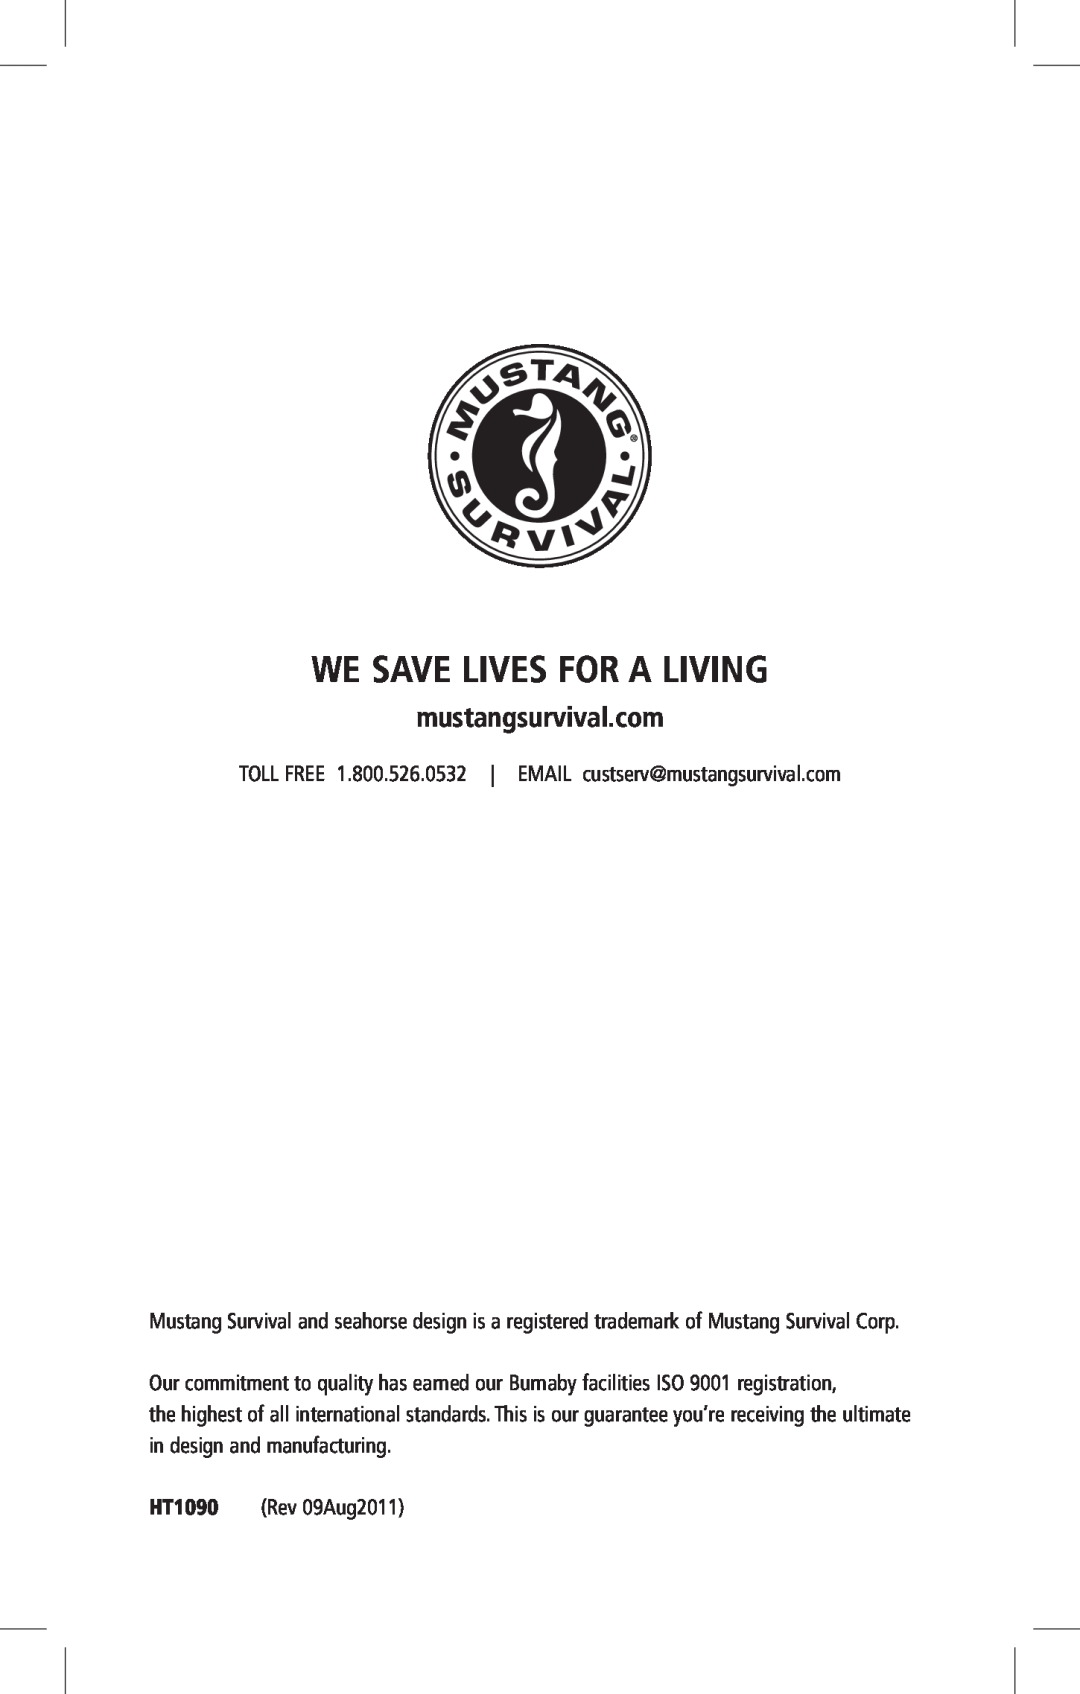 Mustang Survival MD3084, MD3083, MD3082, MD3081 manual mustangsurvival.com, we save lives for a living 